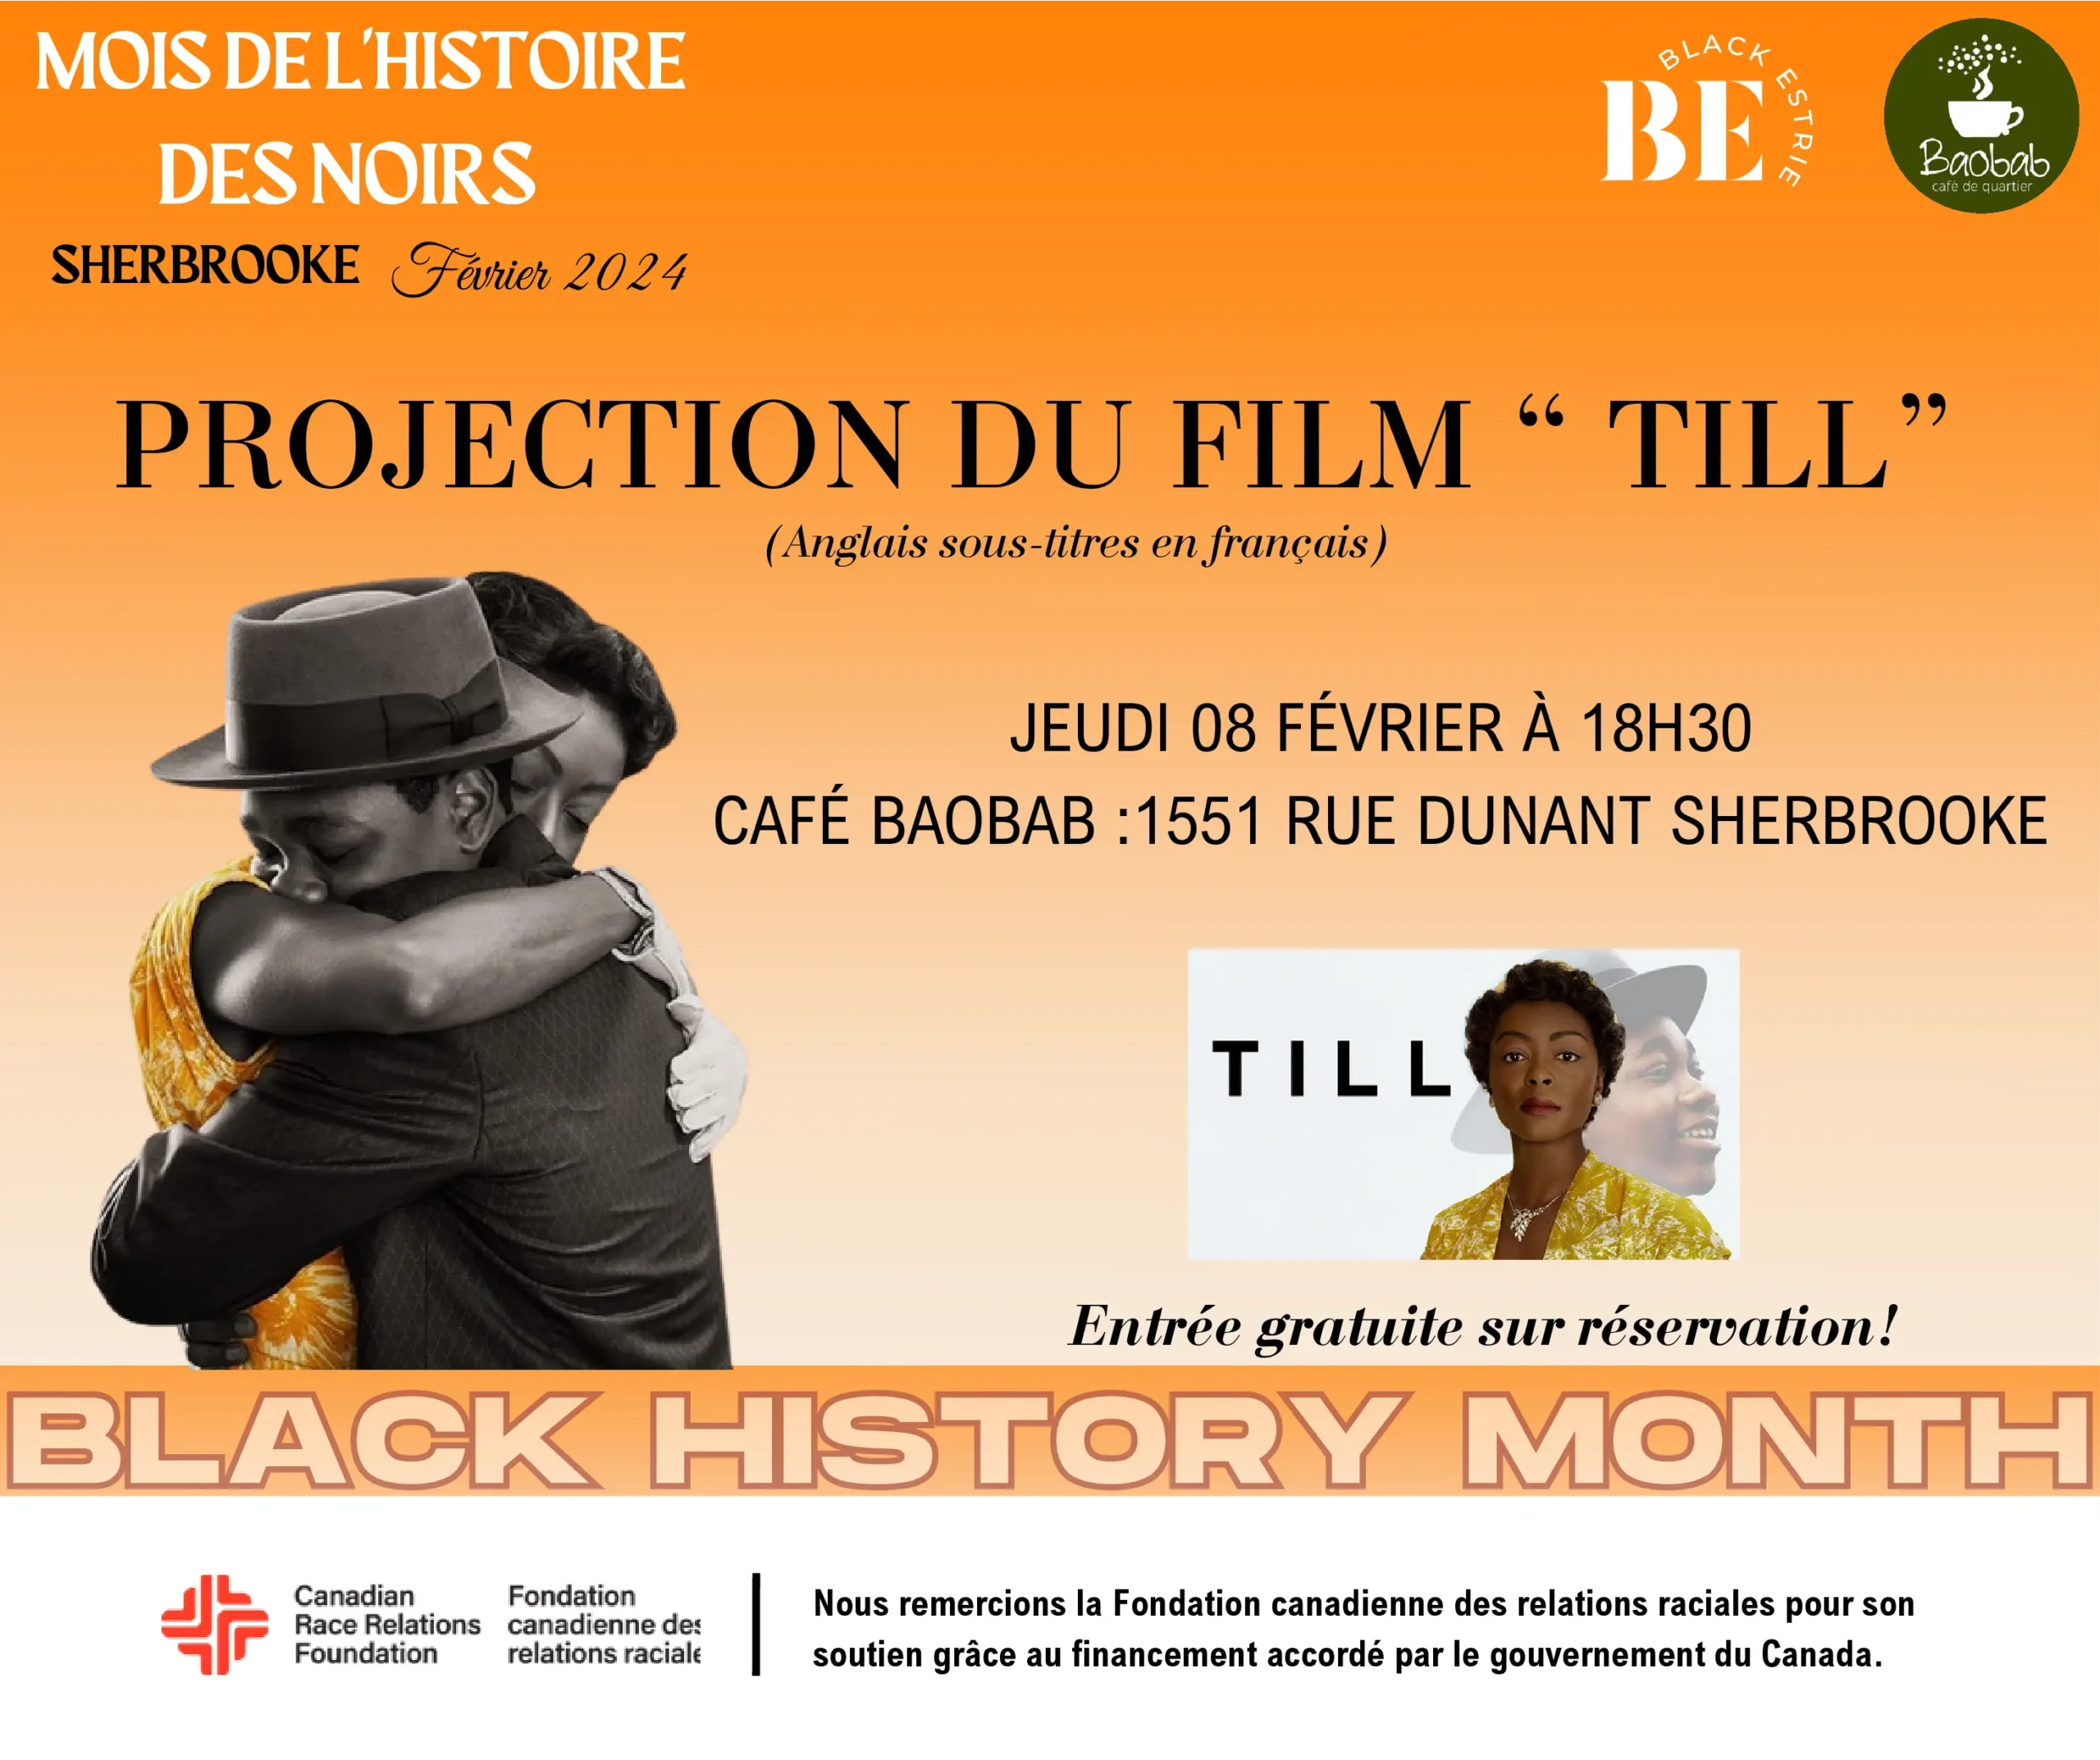 Screening of the movie ‘TILL’ with French subtitles